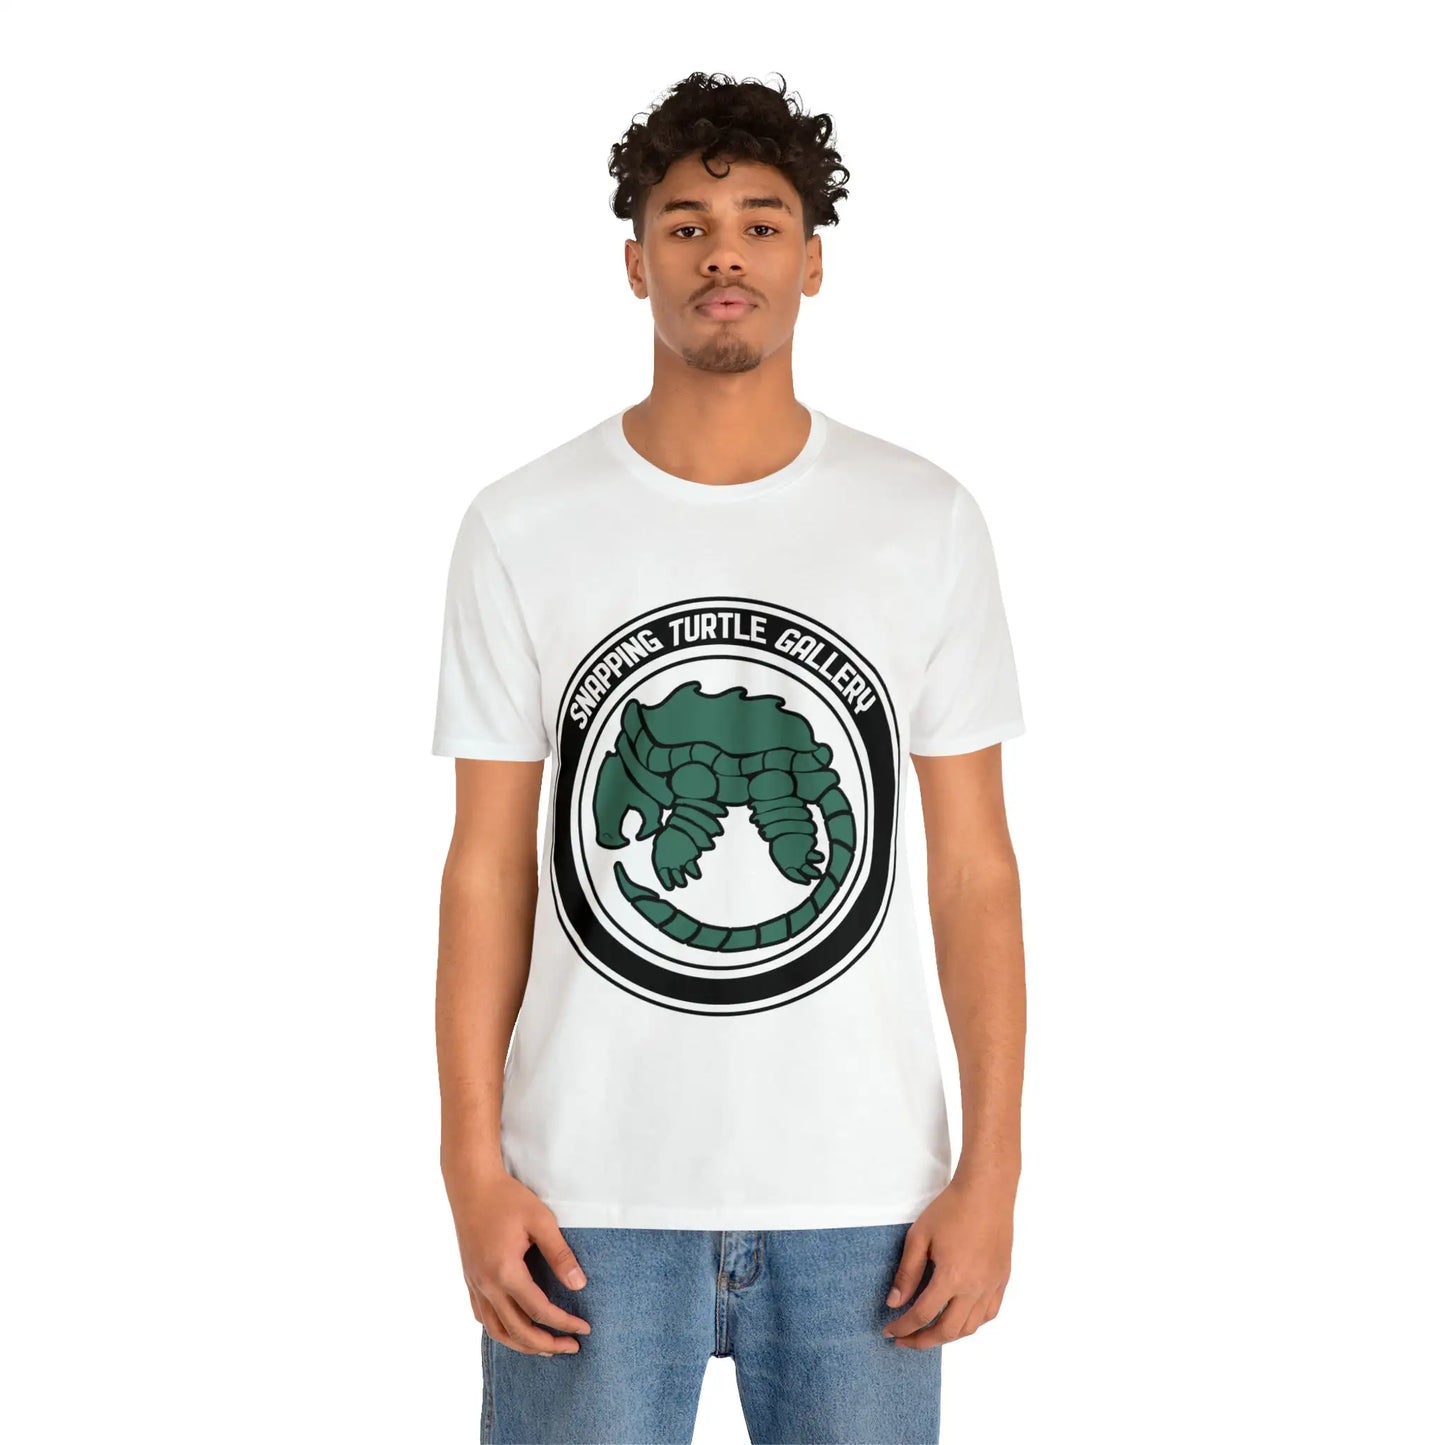 Snapping Turtle gallery Logo Shirt 4